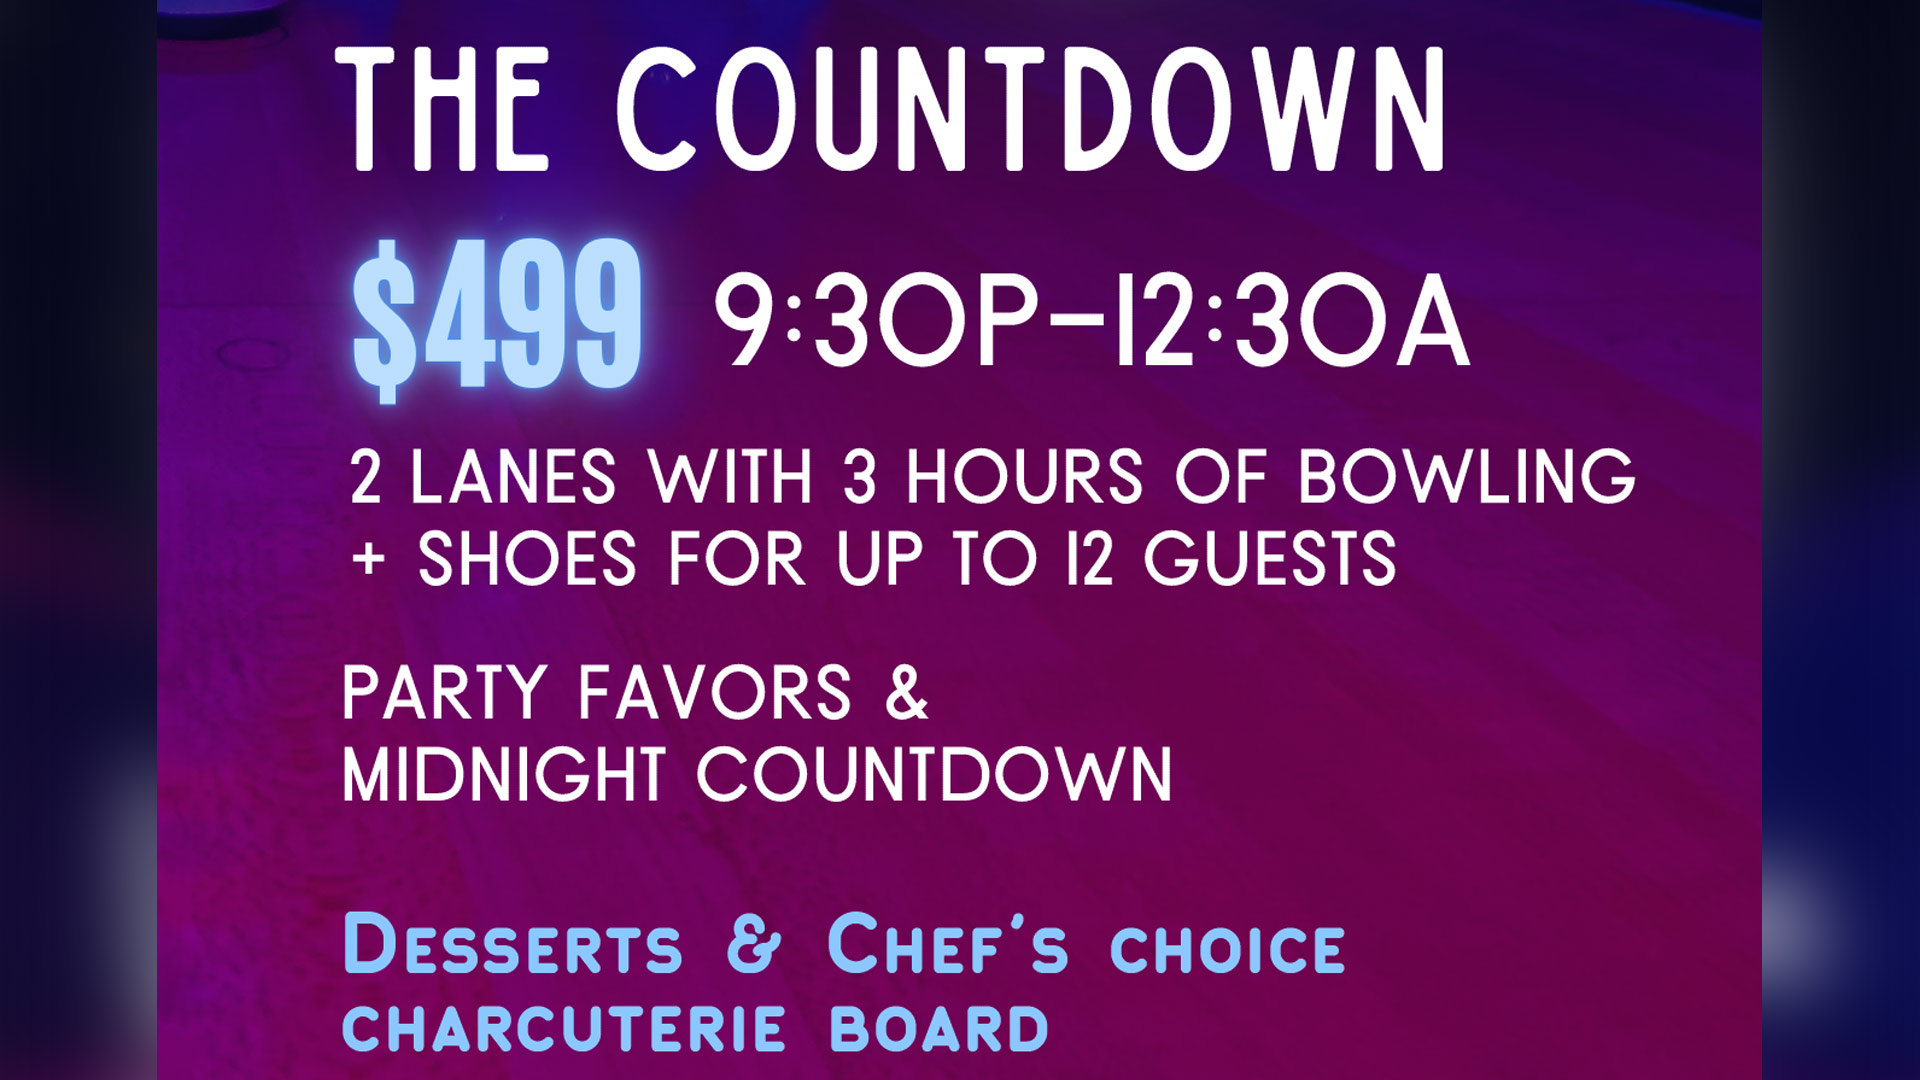 New Year's Eve 2021 The Countdown Party